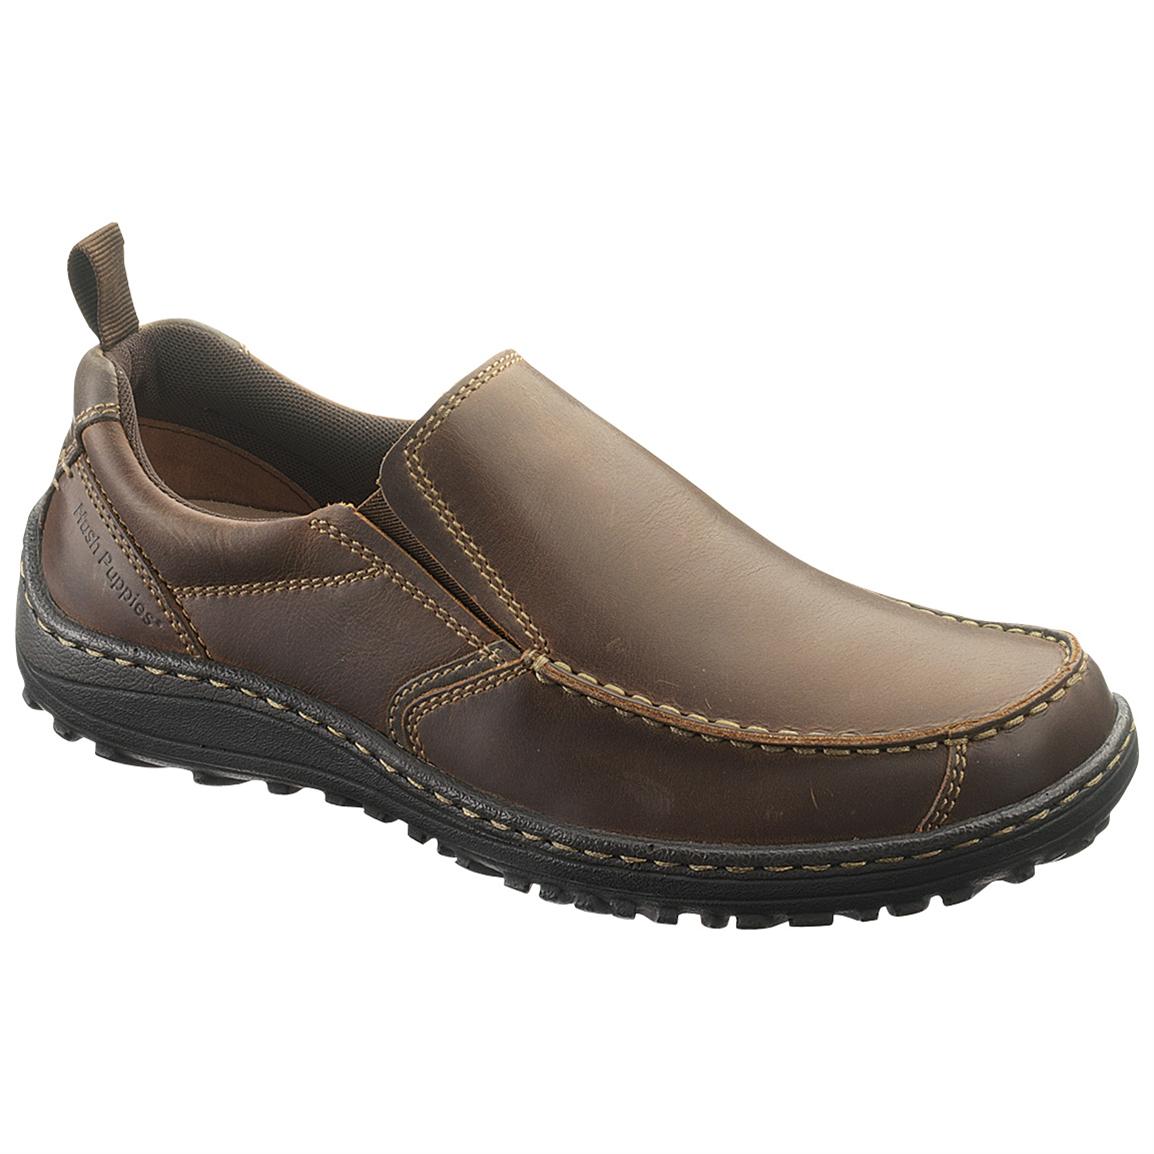 Men's Hush Puppies® Belfast Slip-On MT Shoes - 283720, Casual Shoes at Sportsman's Guide